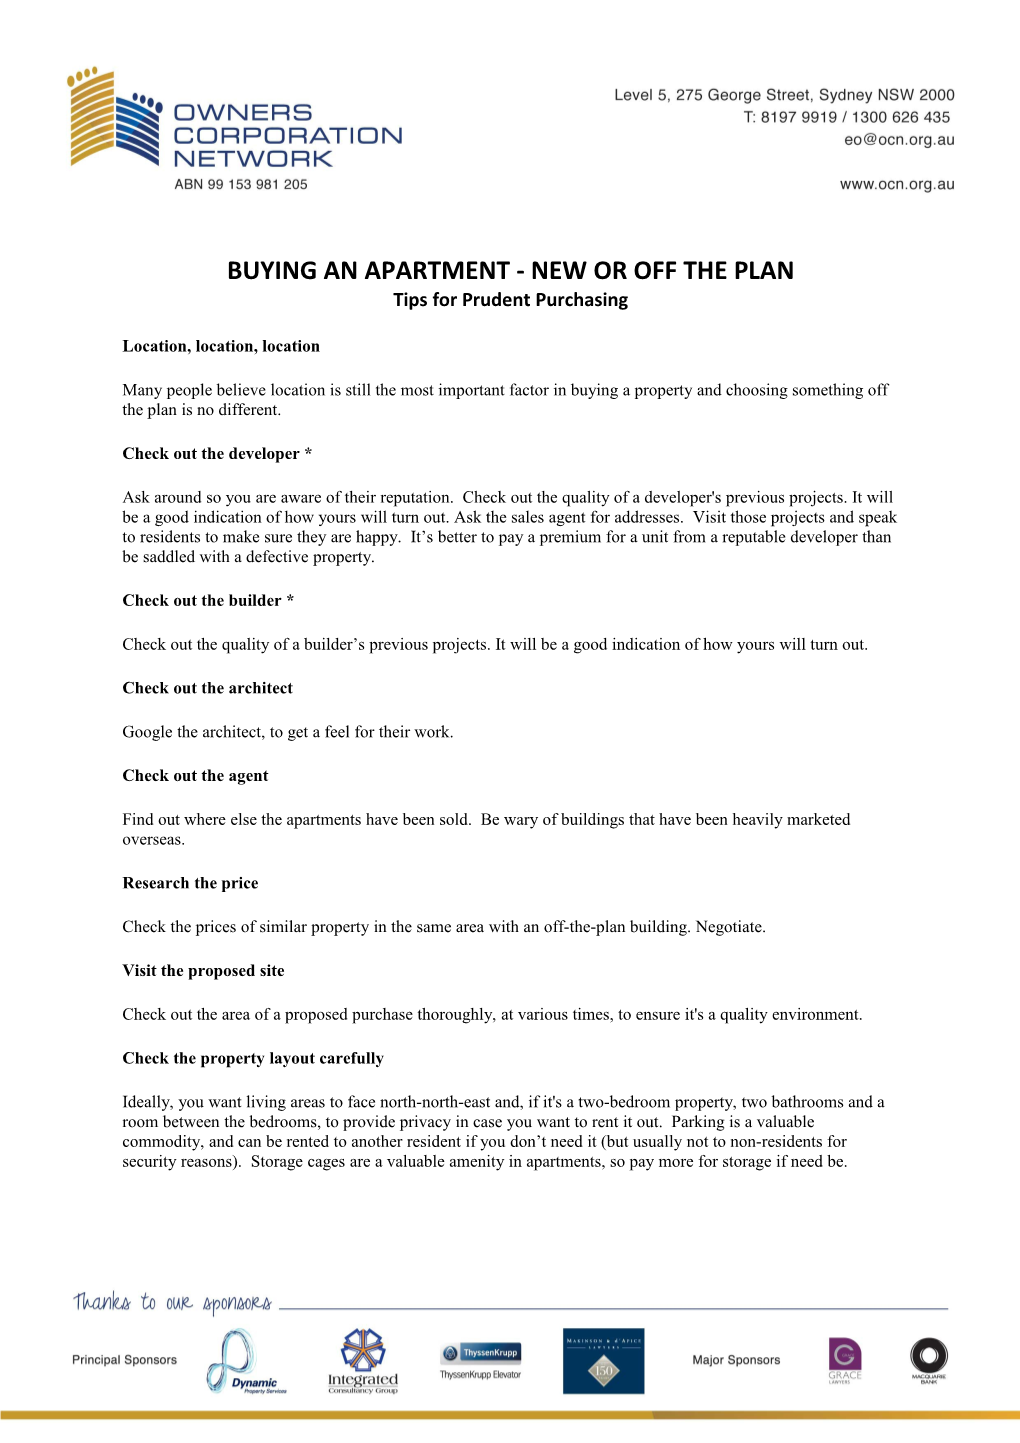 Buying an Apartment - New Or Off the Plan